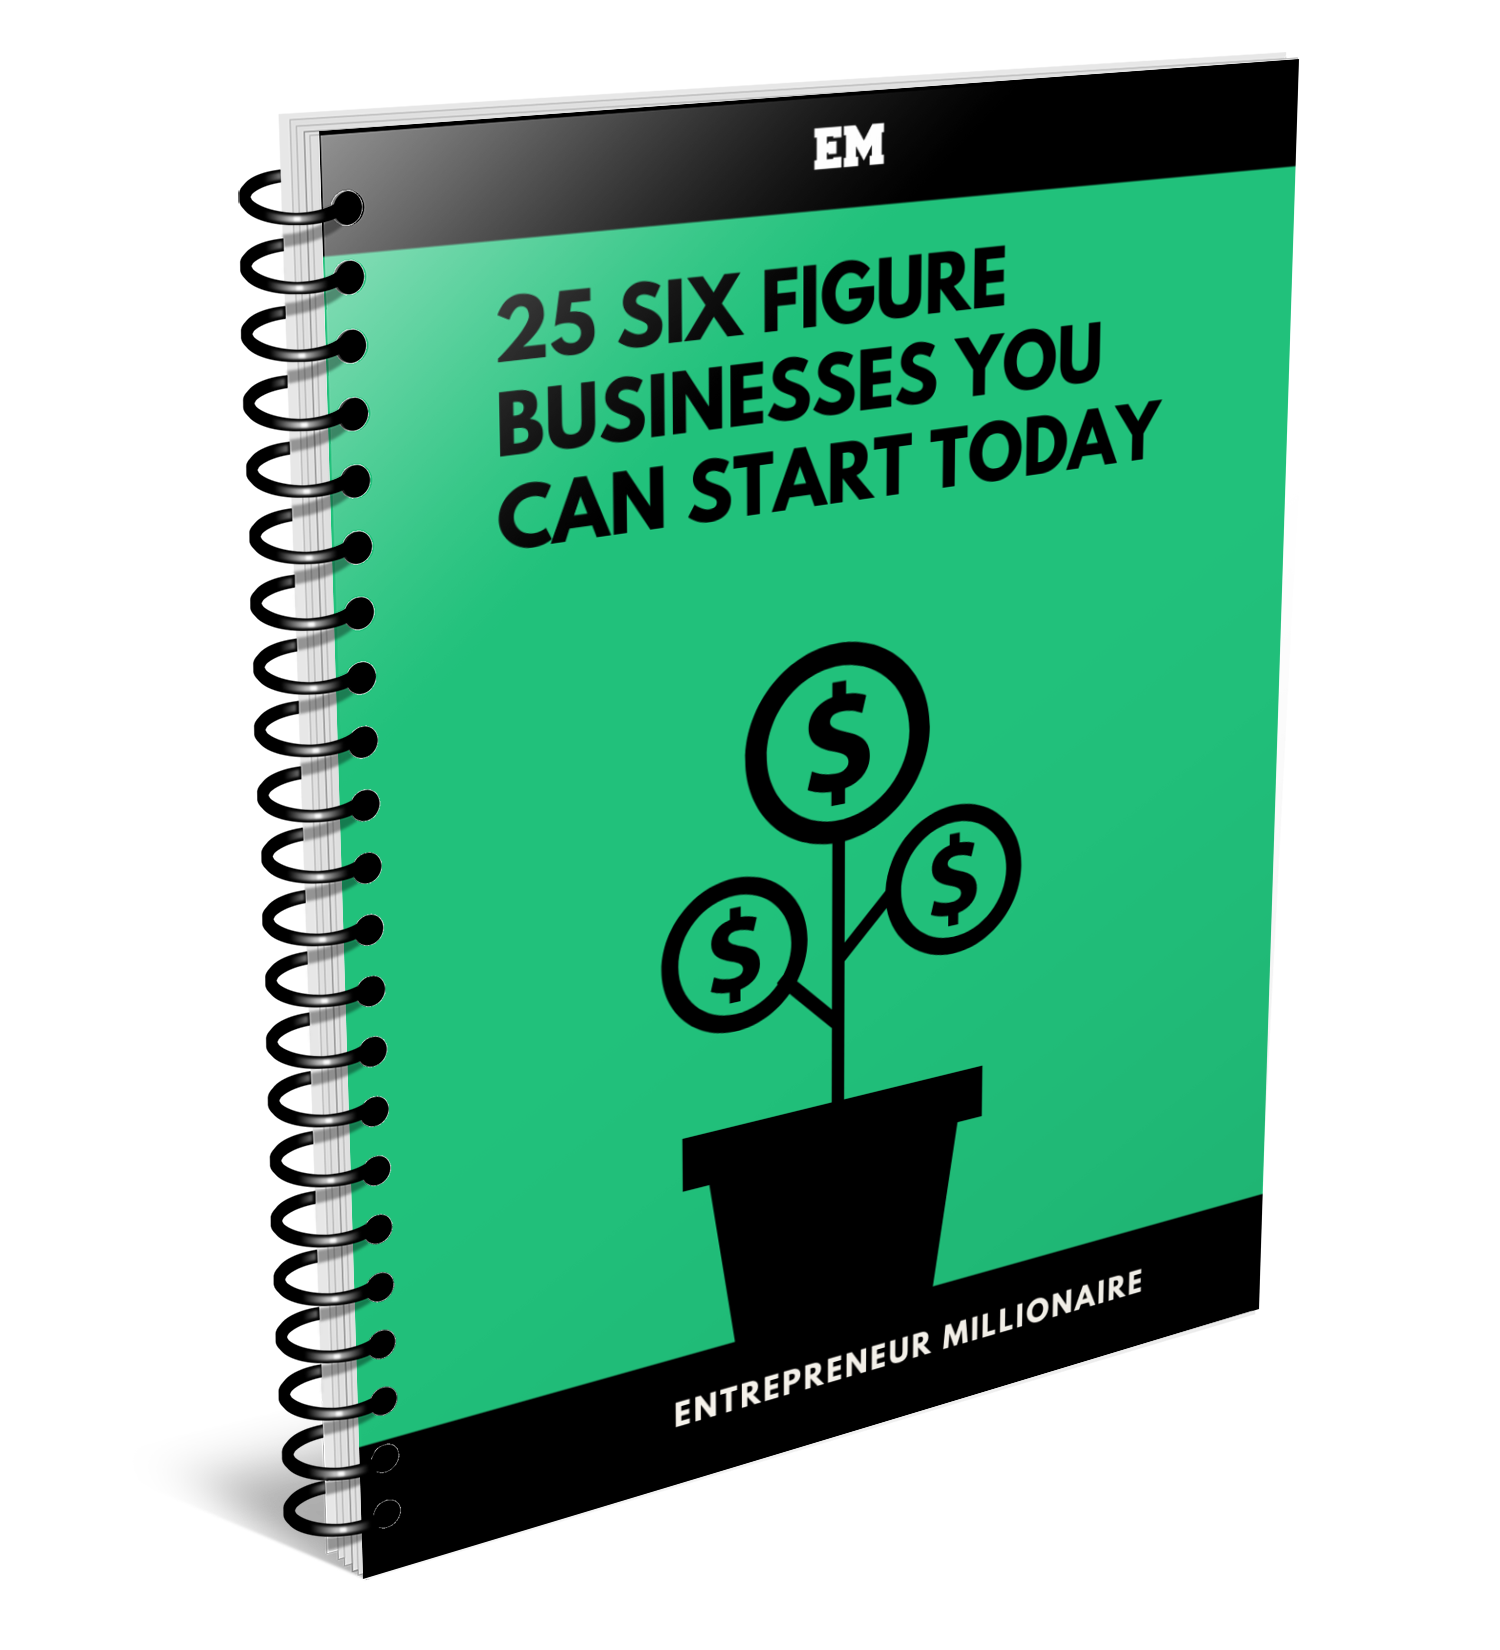 25 Six Figure Businesses You Can Start Today Guide Cover